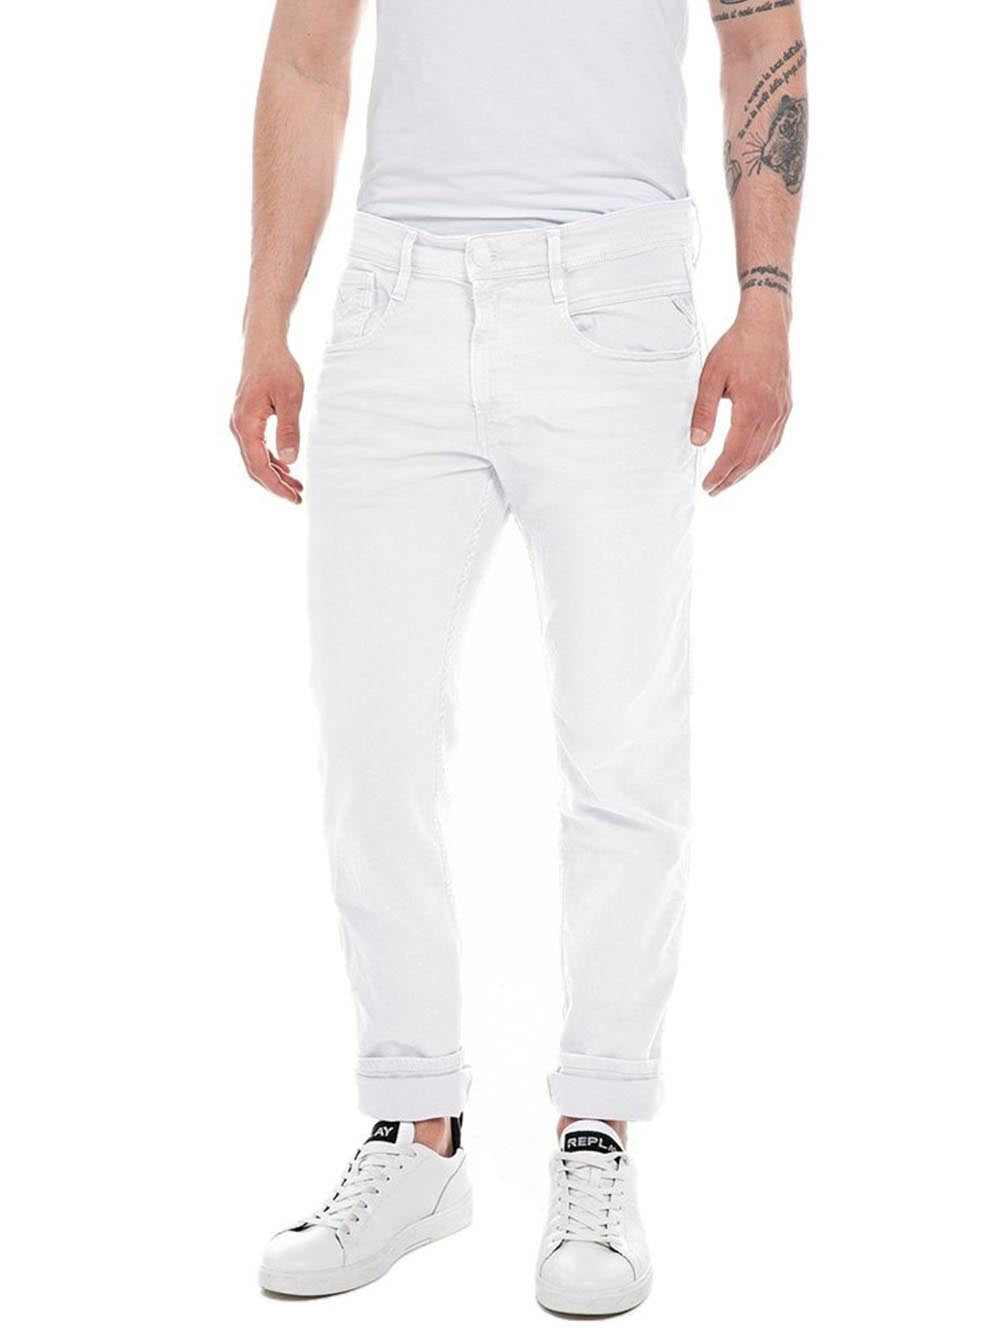 Replay Jeans Uomo M914y .000.8488701 Bianco